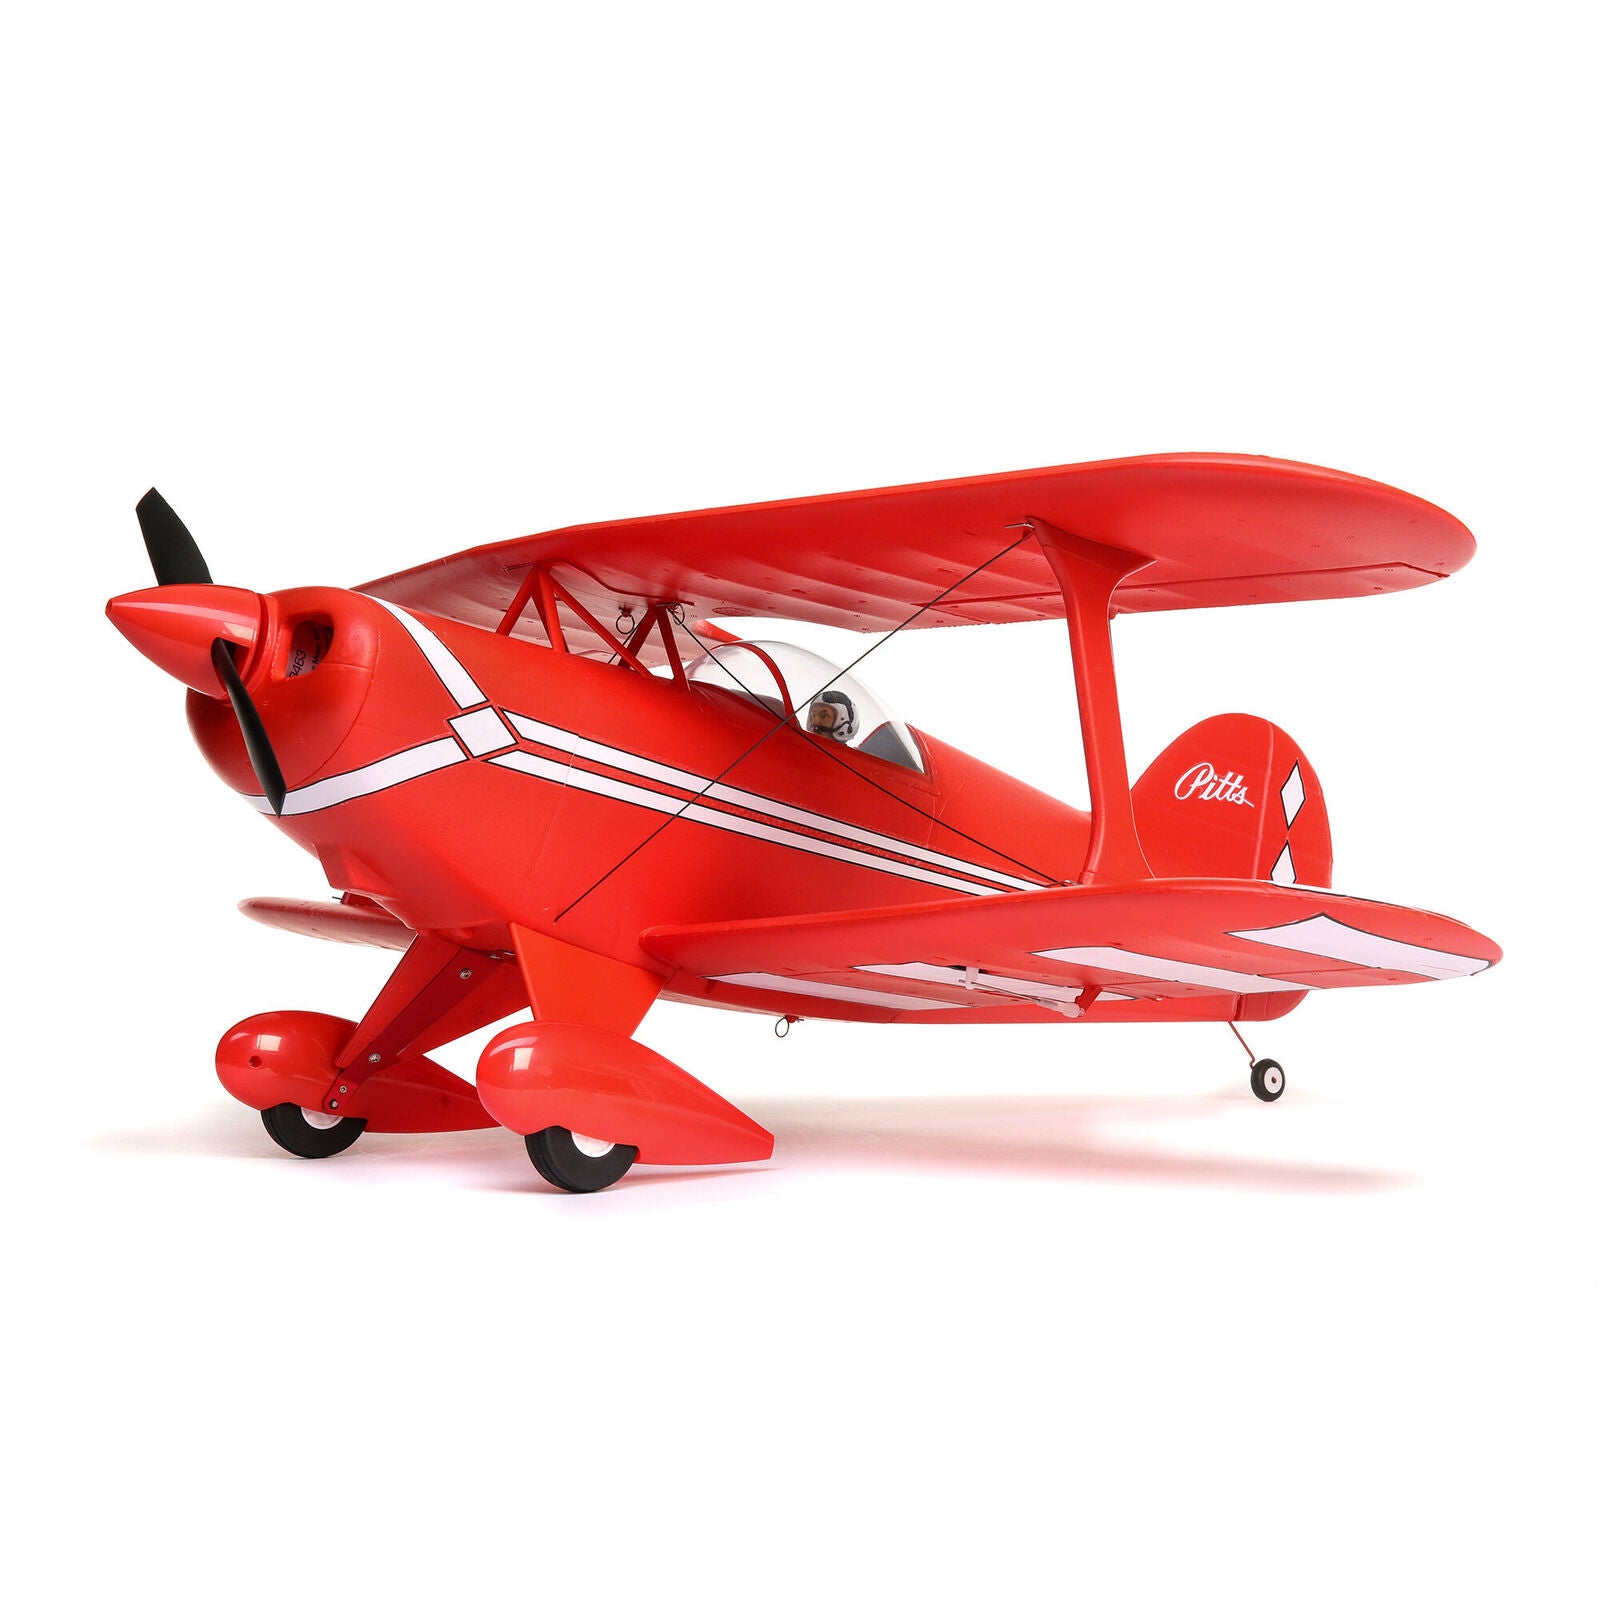 EFLITE EFL35500 Pitts S-1S BNF Basic with AS3X and SAFE Select 850mm